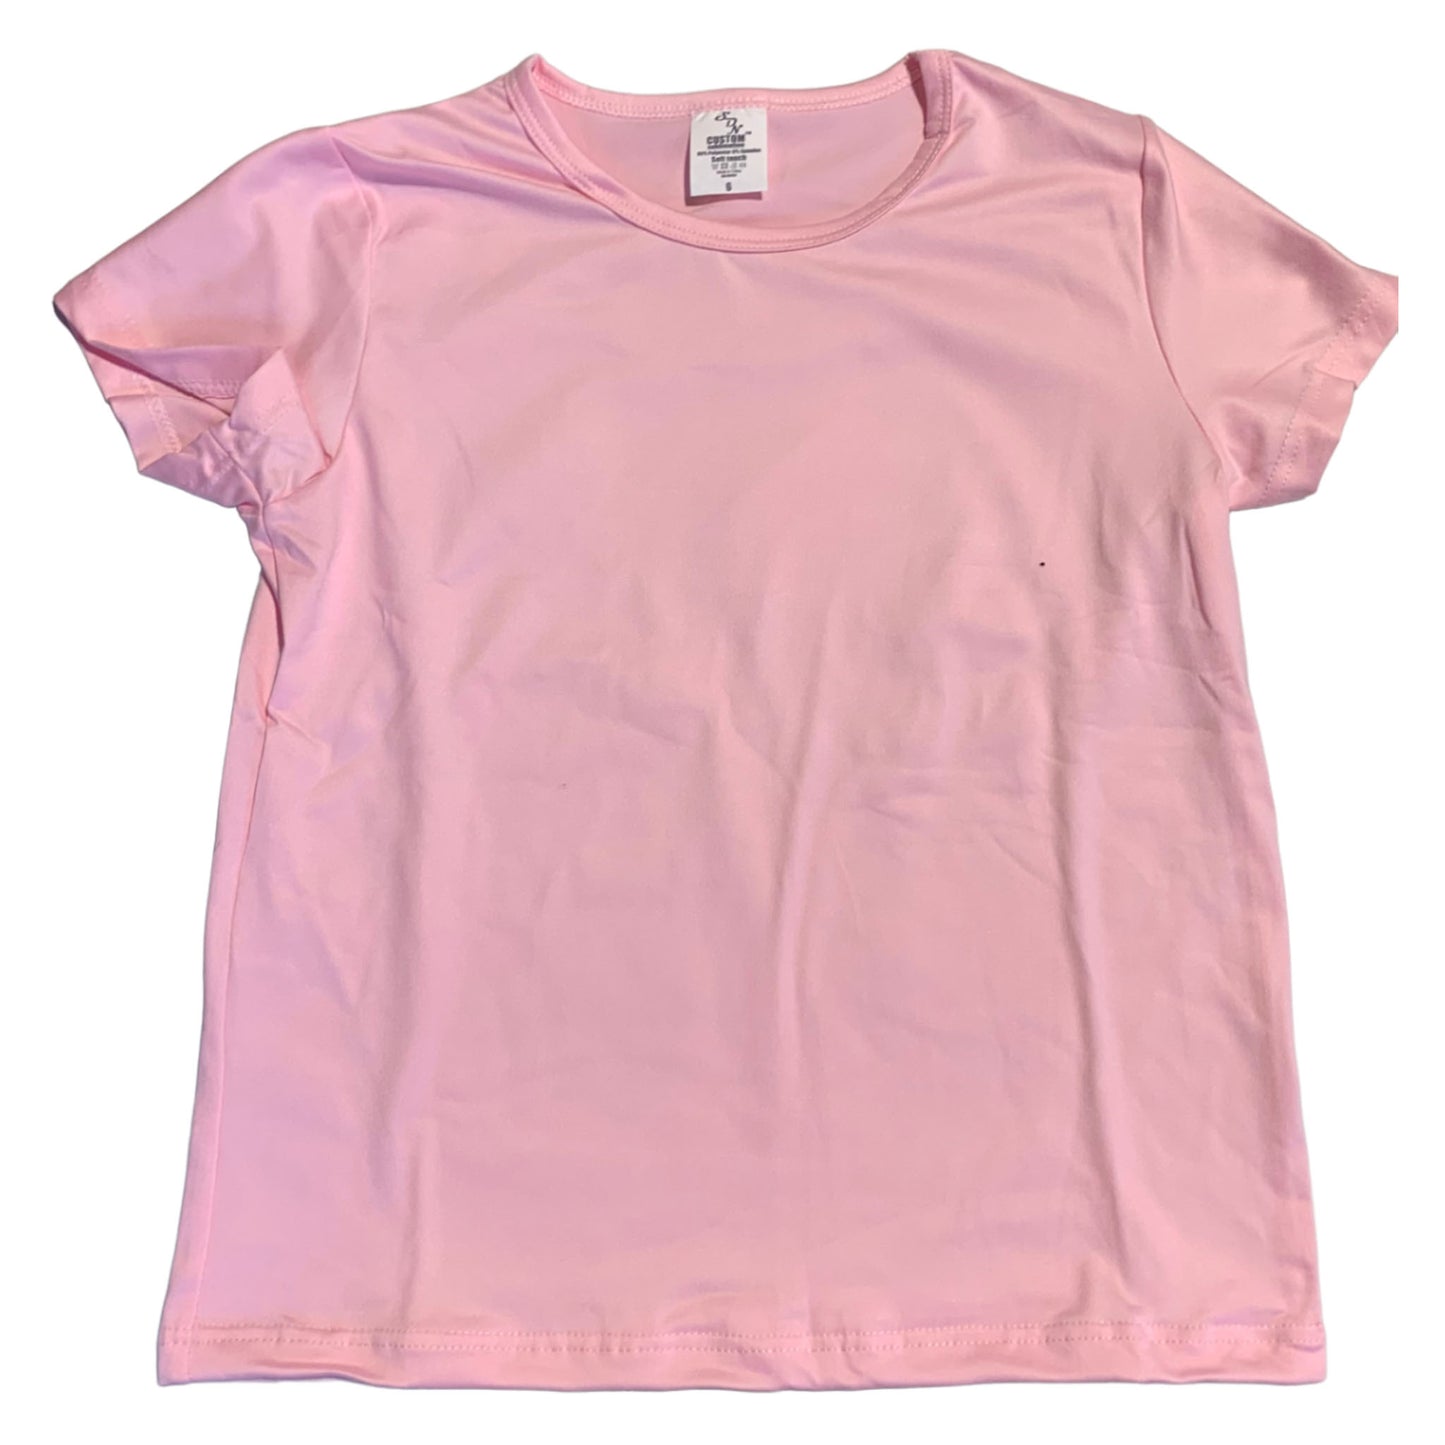 5 Pack- ATHLETIC SPORT Kids Sublimation T-Shirts Pink (95% Polyester-5% Spandex) Super Soft Cotton Feel